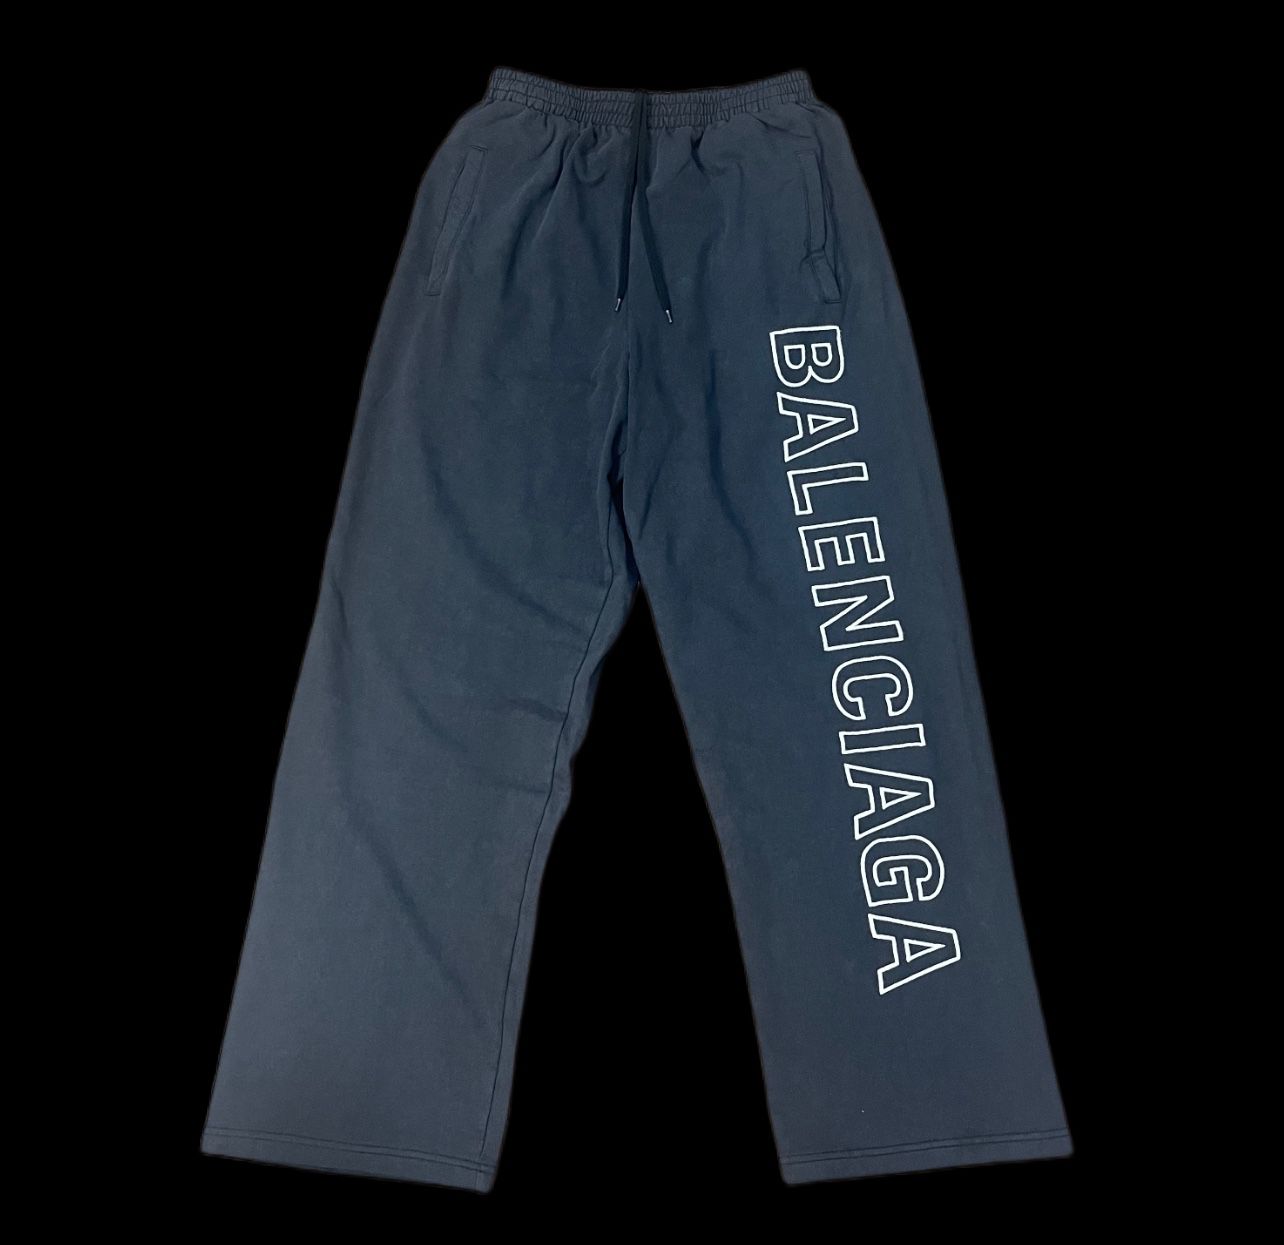 [Balenciaga Outline Baggy Sweatpants in black and white curly fleece